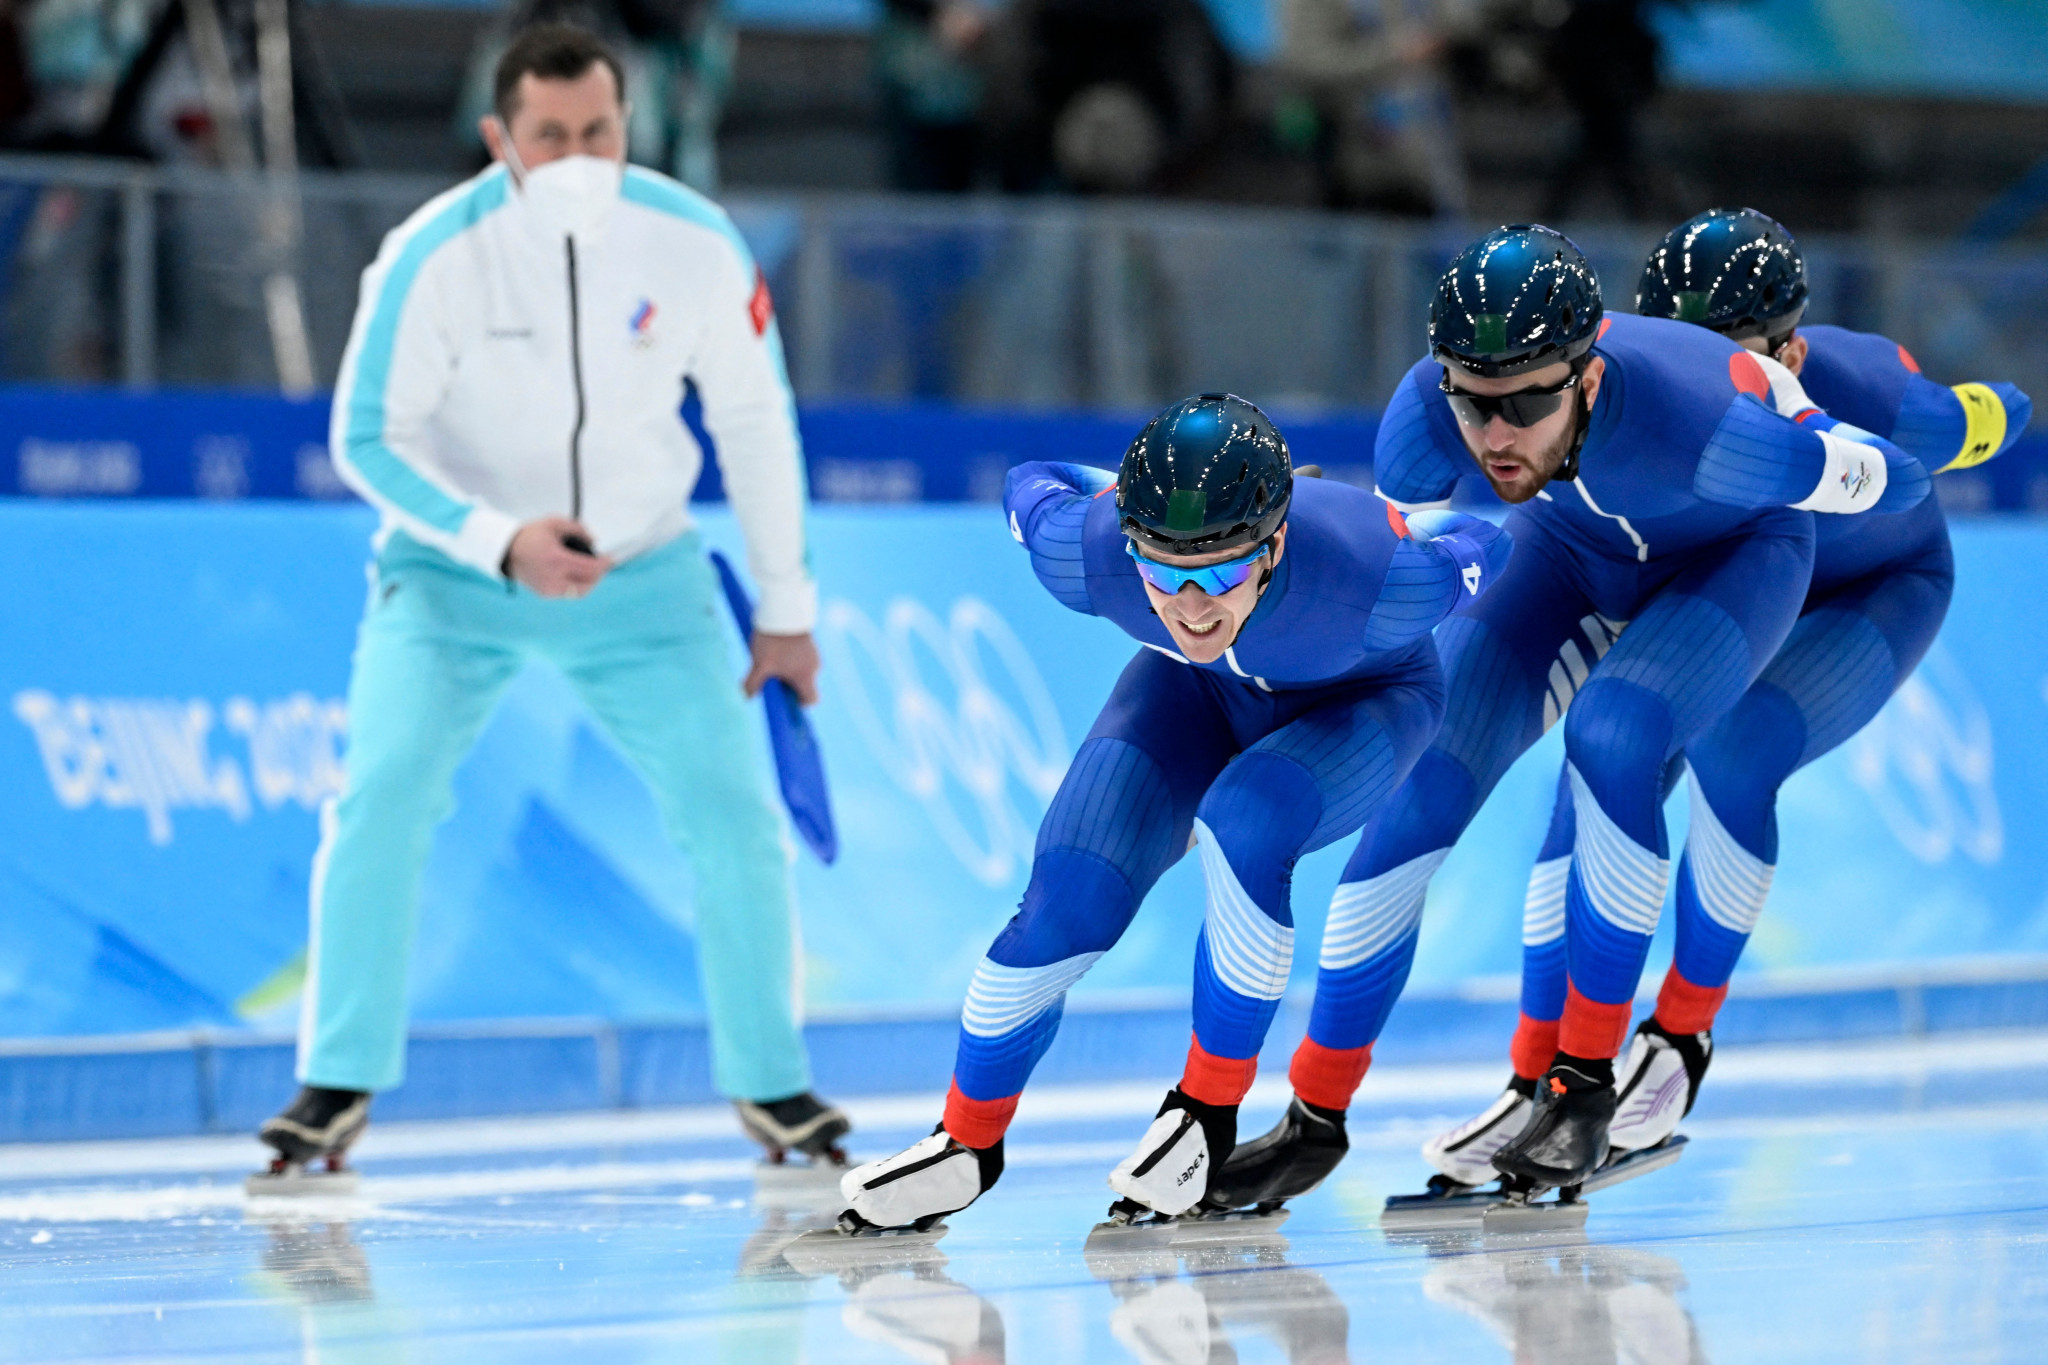 ISU events due to take place in Russia have been postponed ©Getty Images